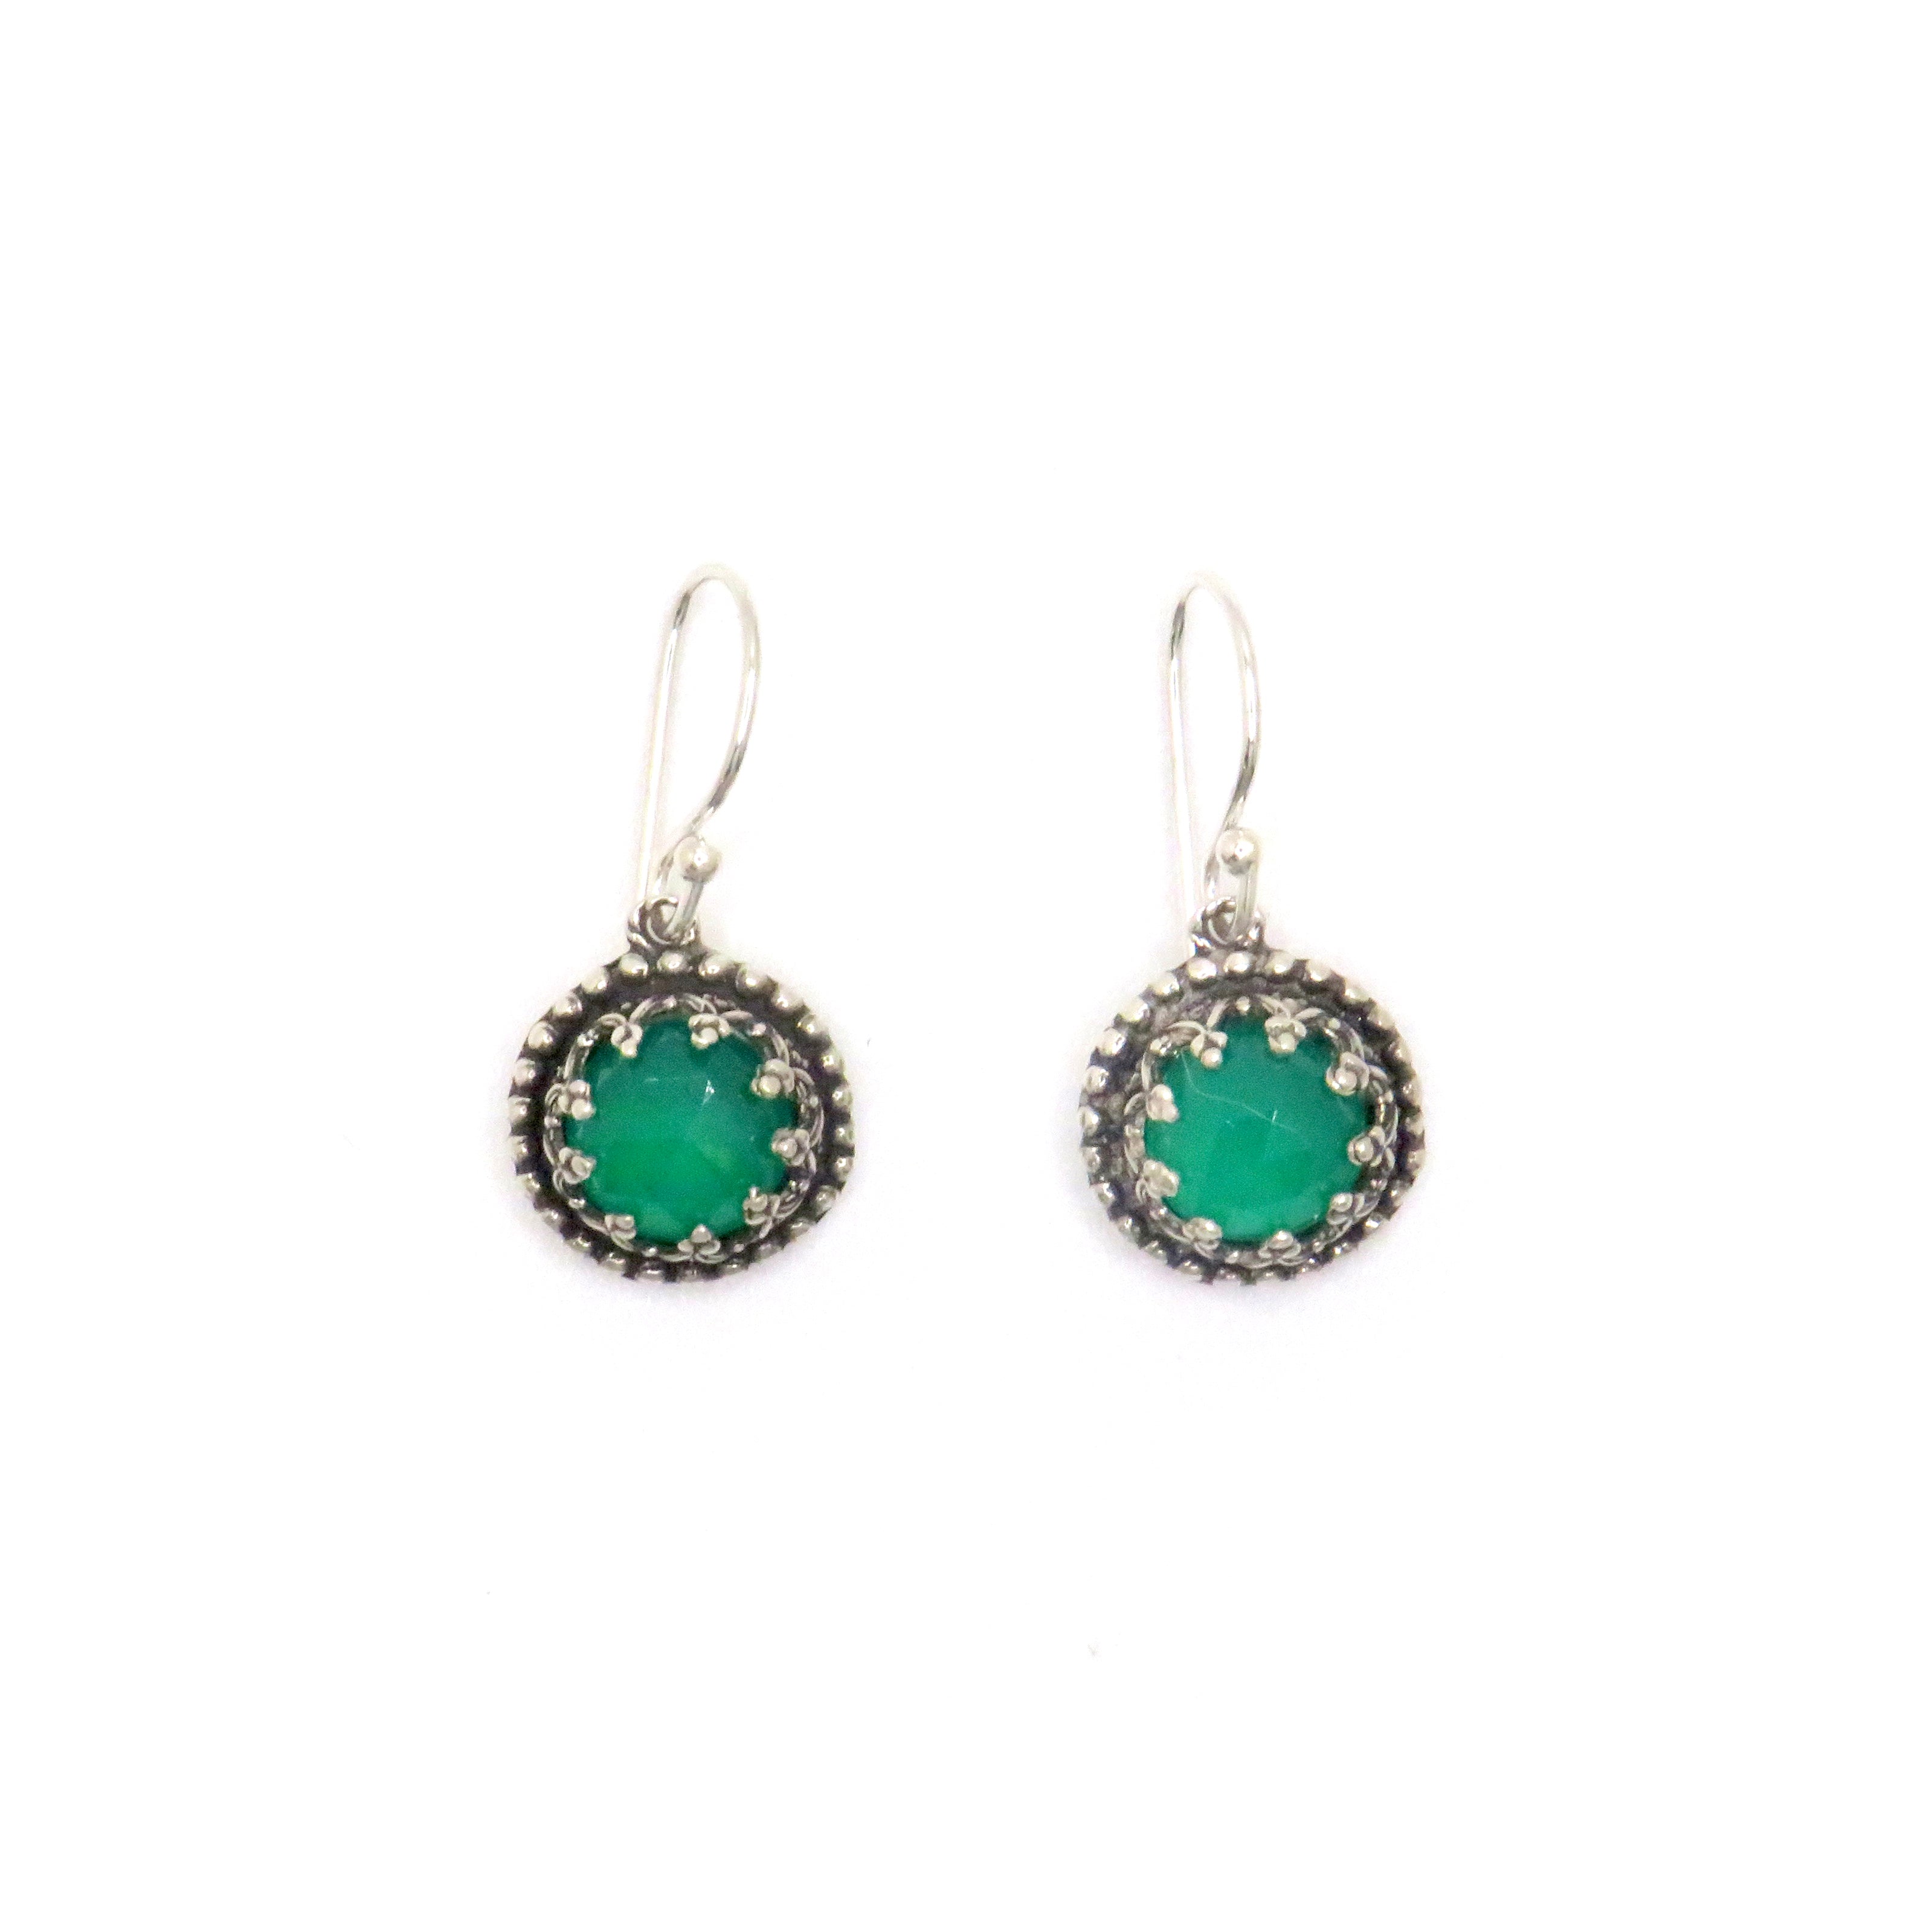 Small Green Onyx and Sterling Silver Bezel Earrings